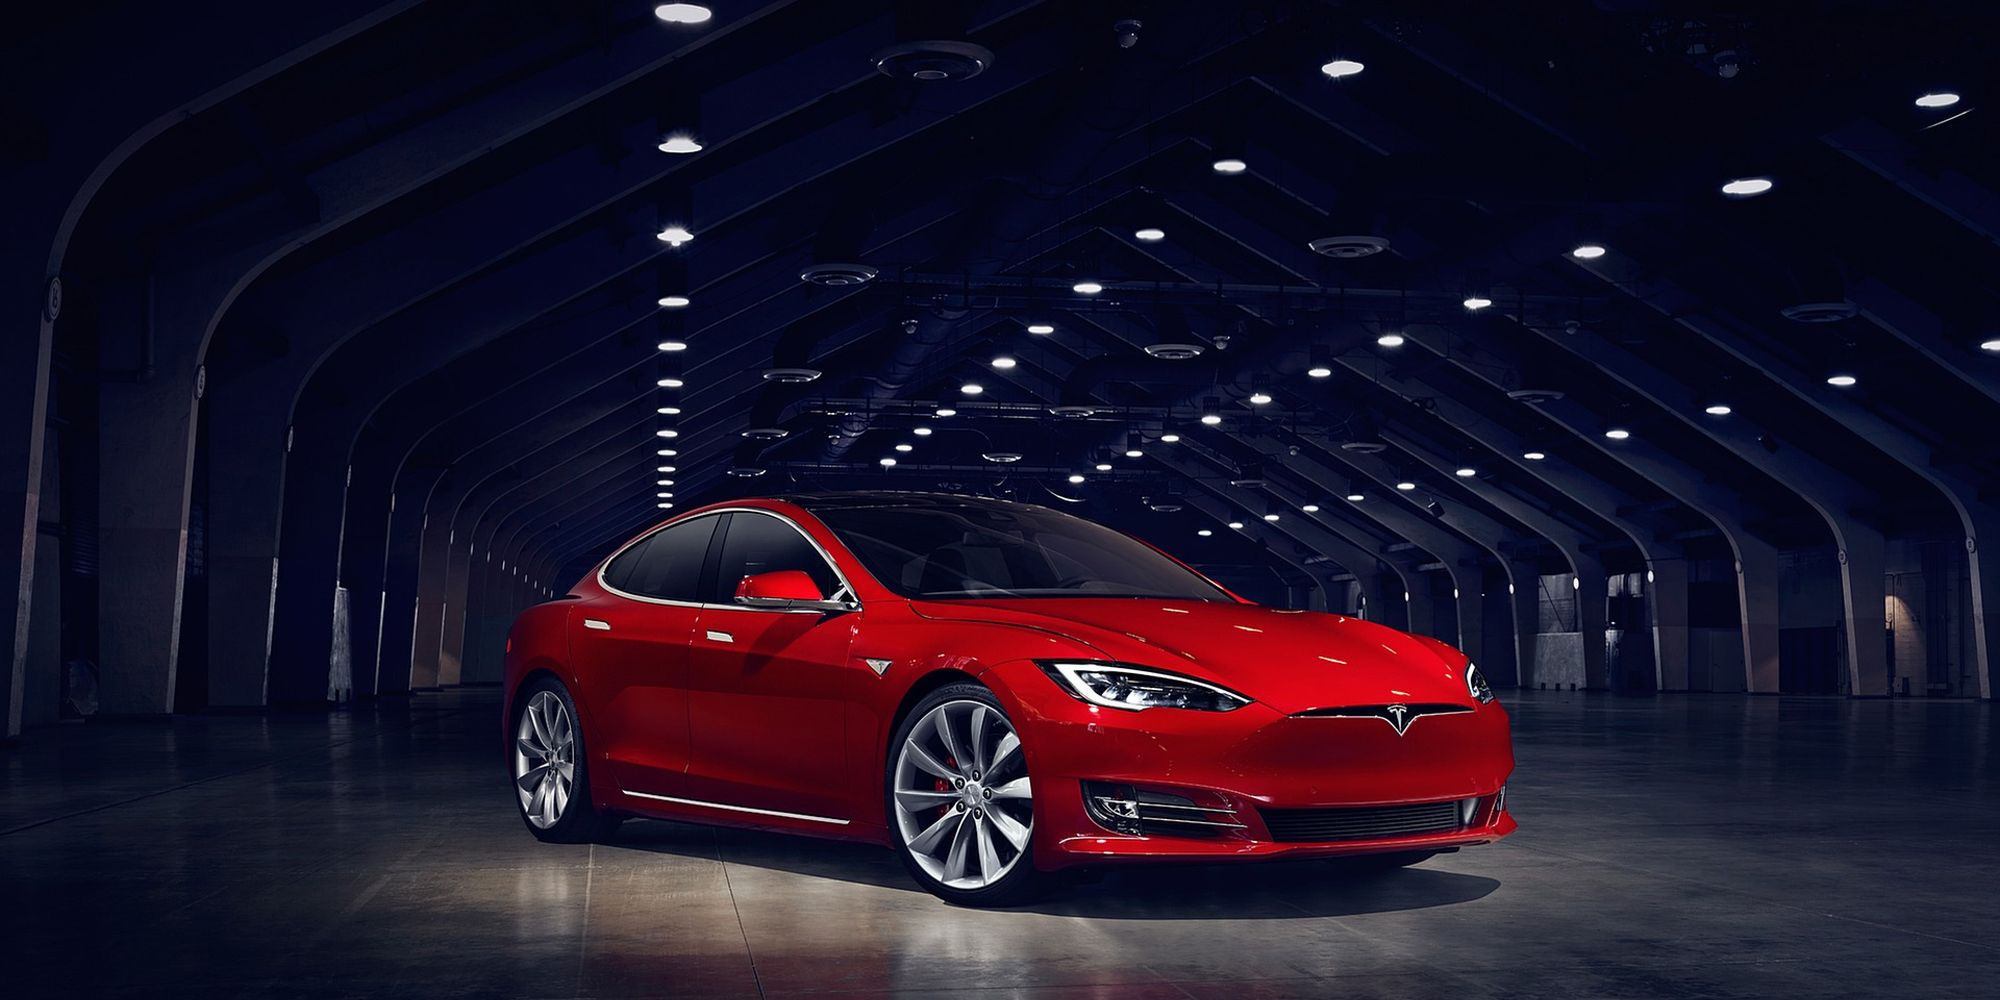 The front of the first facelift Model S